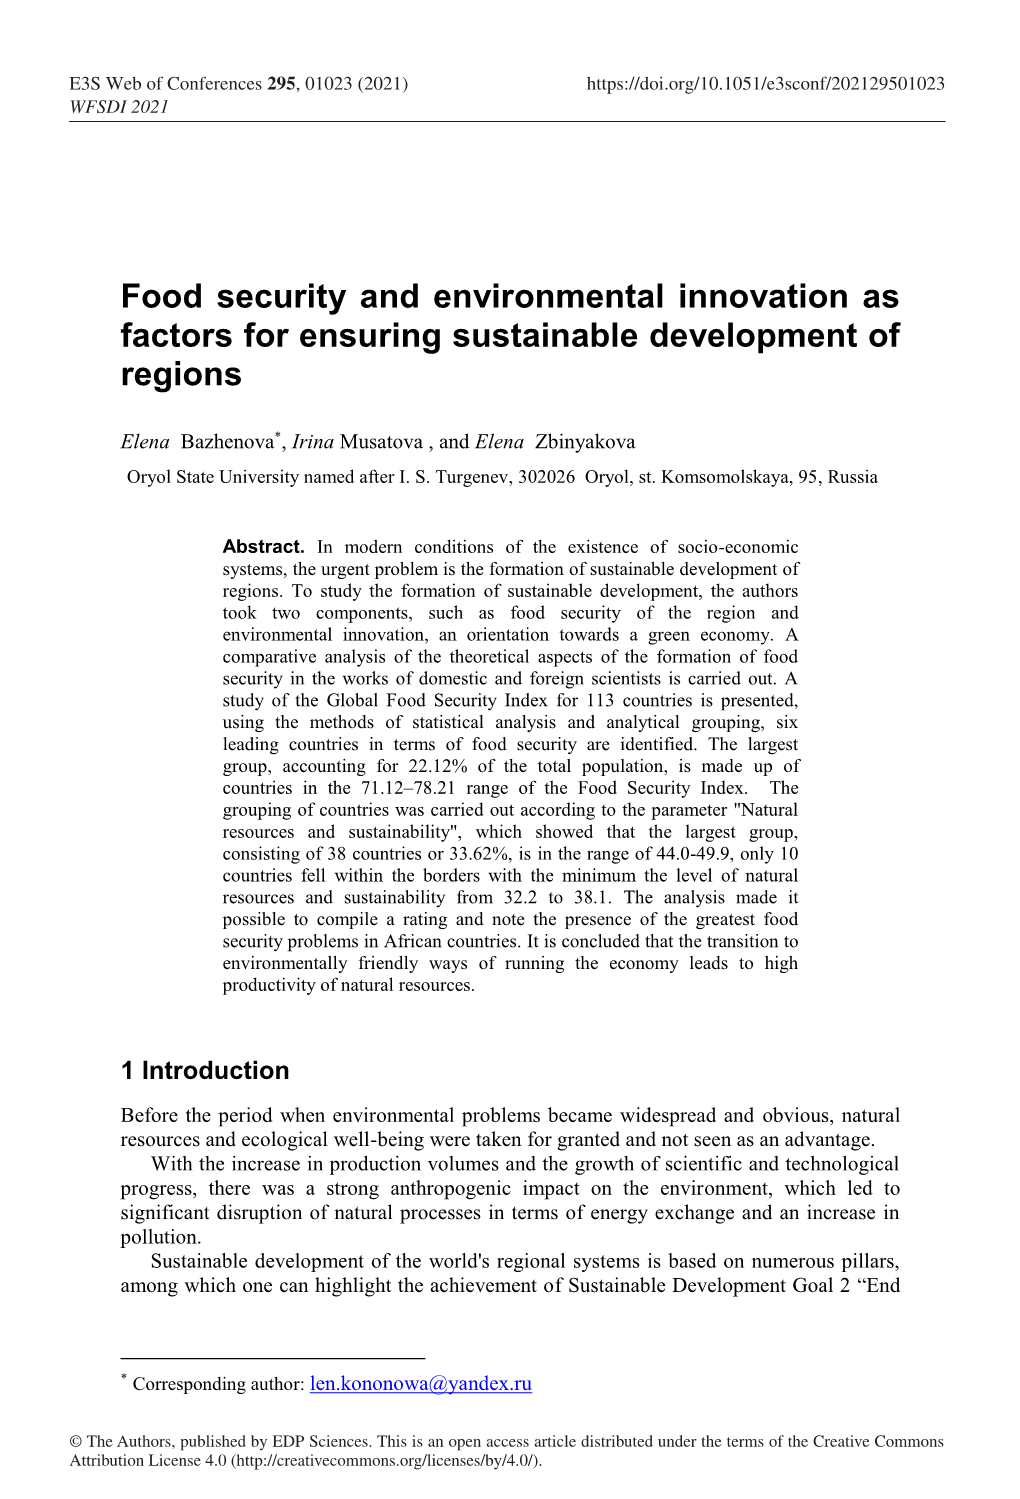 Food Security and Environmental Innovation As Factors for Ensuring Sustainable Development of Regions